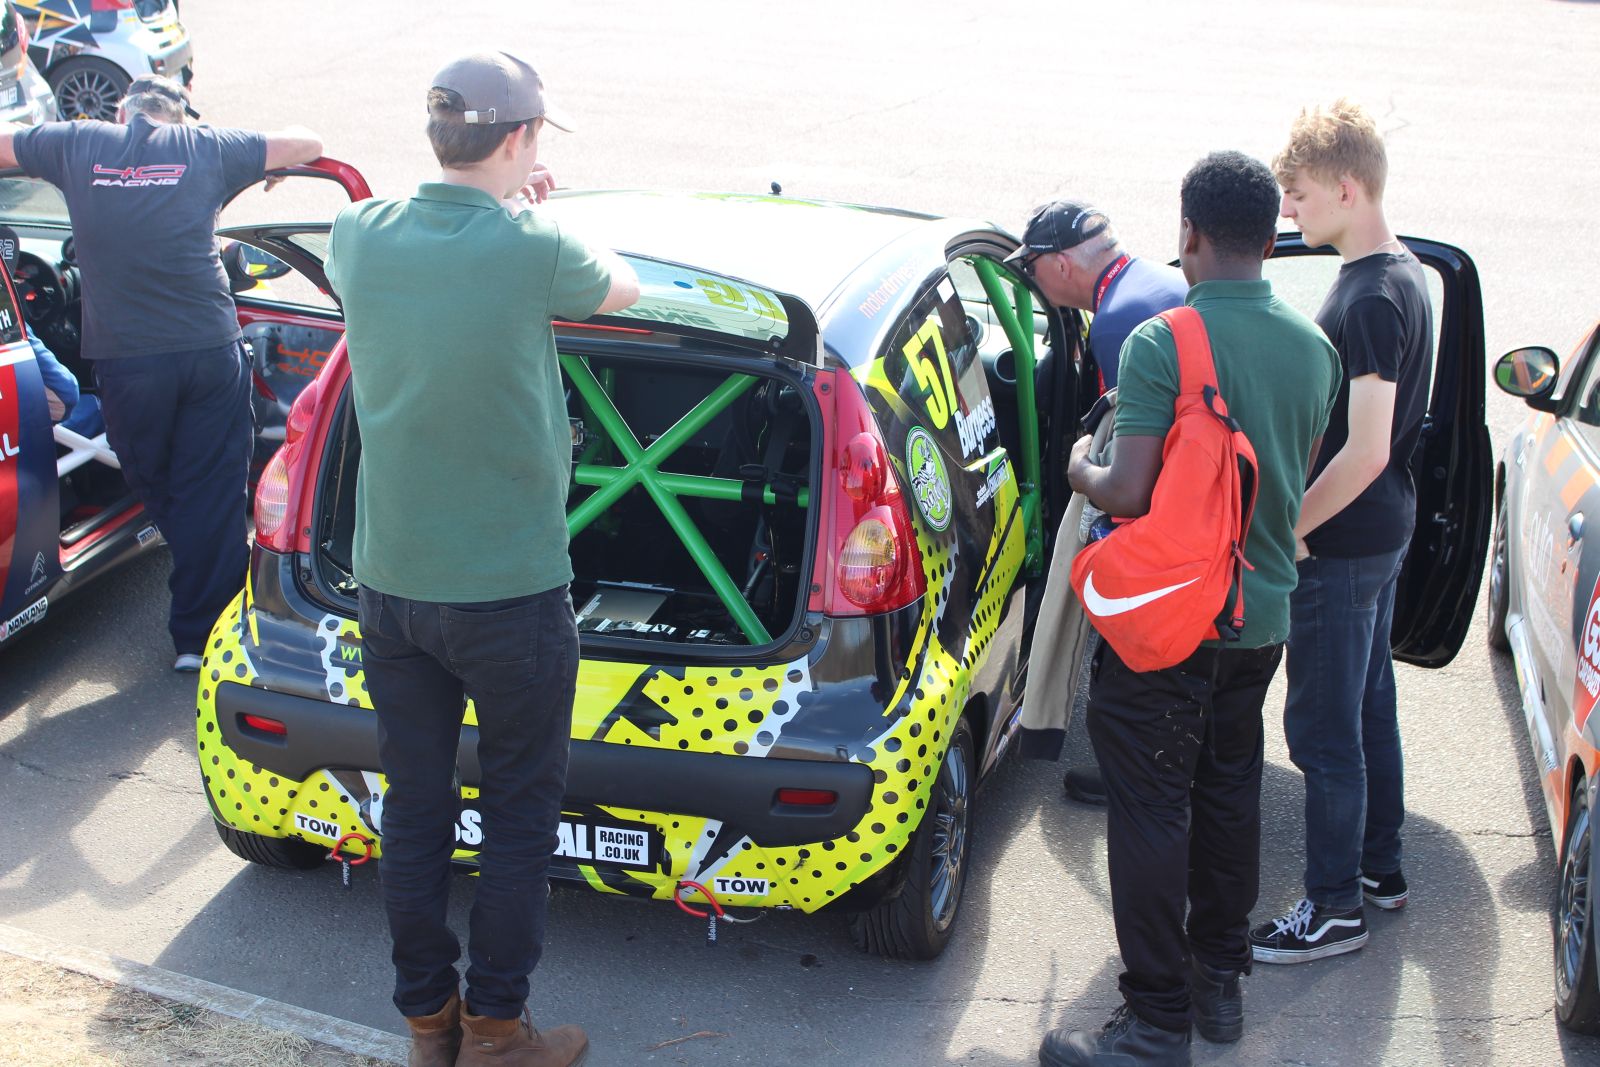 Students checking the car before the final race of the day